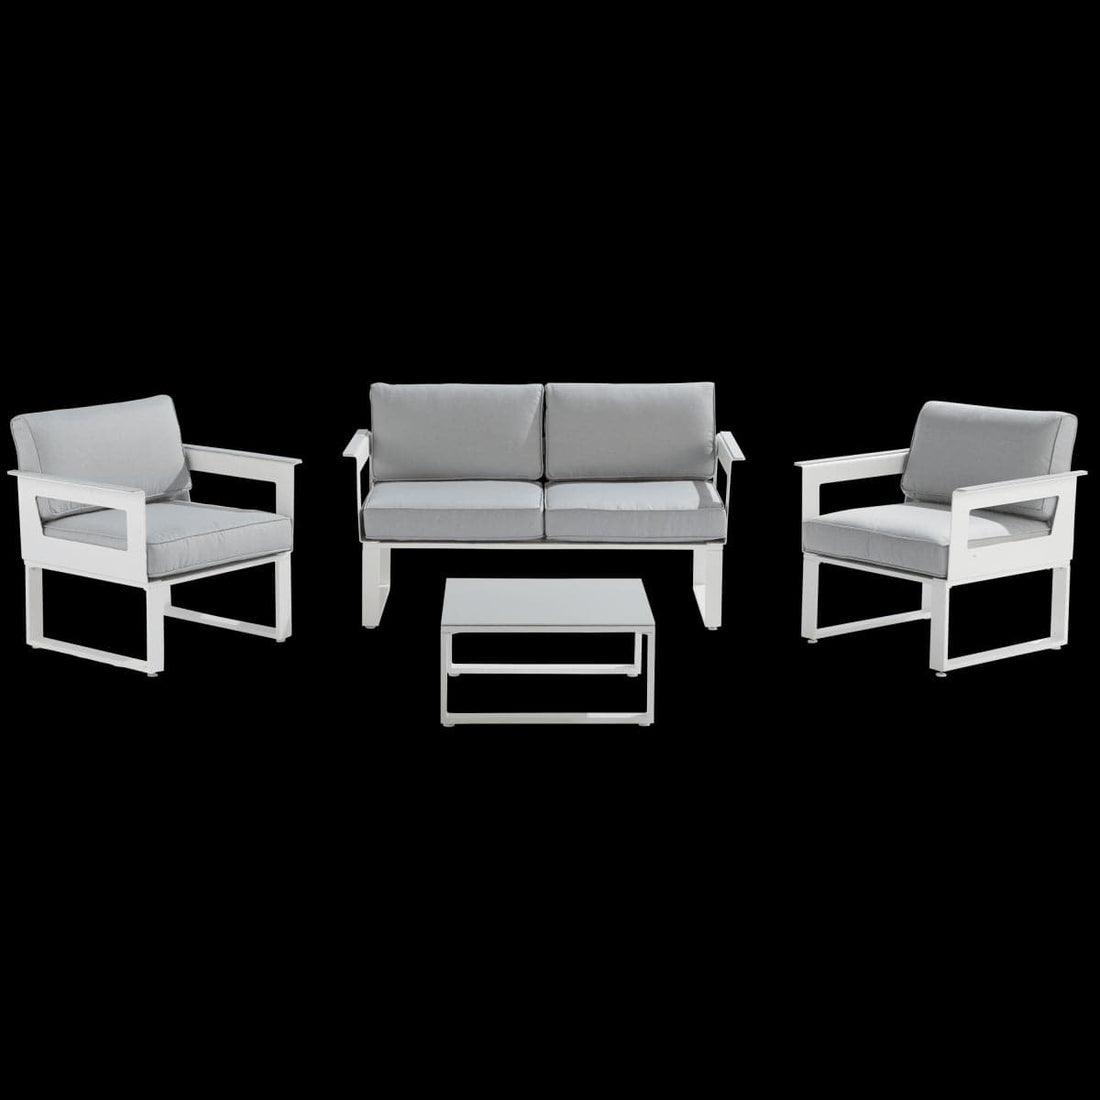 COFFEE SET NATERIAL ODYSSEA SOFA 2 ARMCHAIRS AND ALUMINIUM TABLE WHITE - best price from Maltashopper.com BR500015363